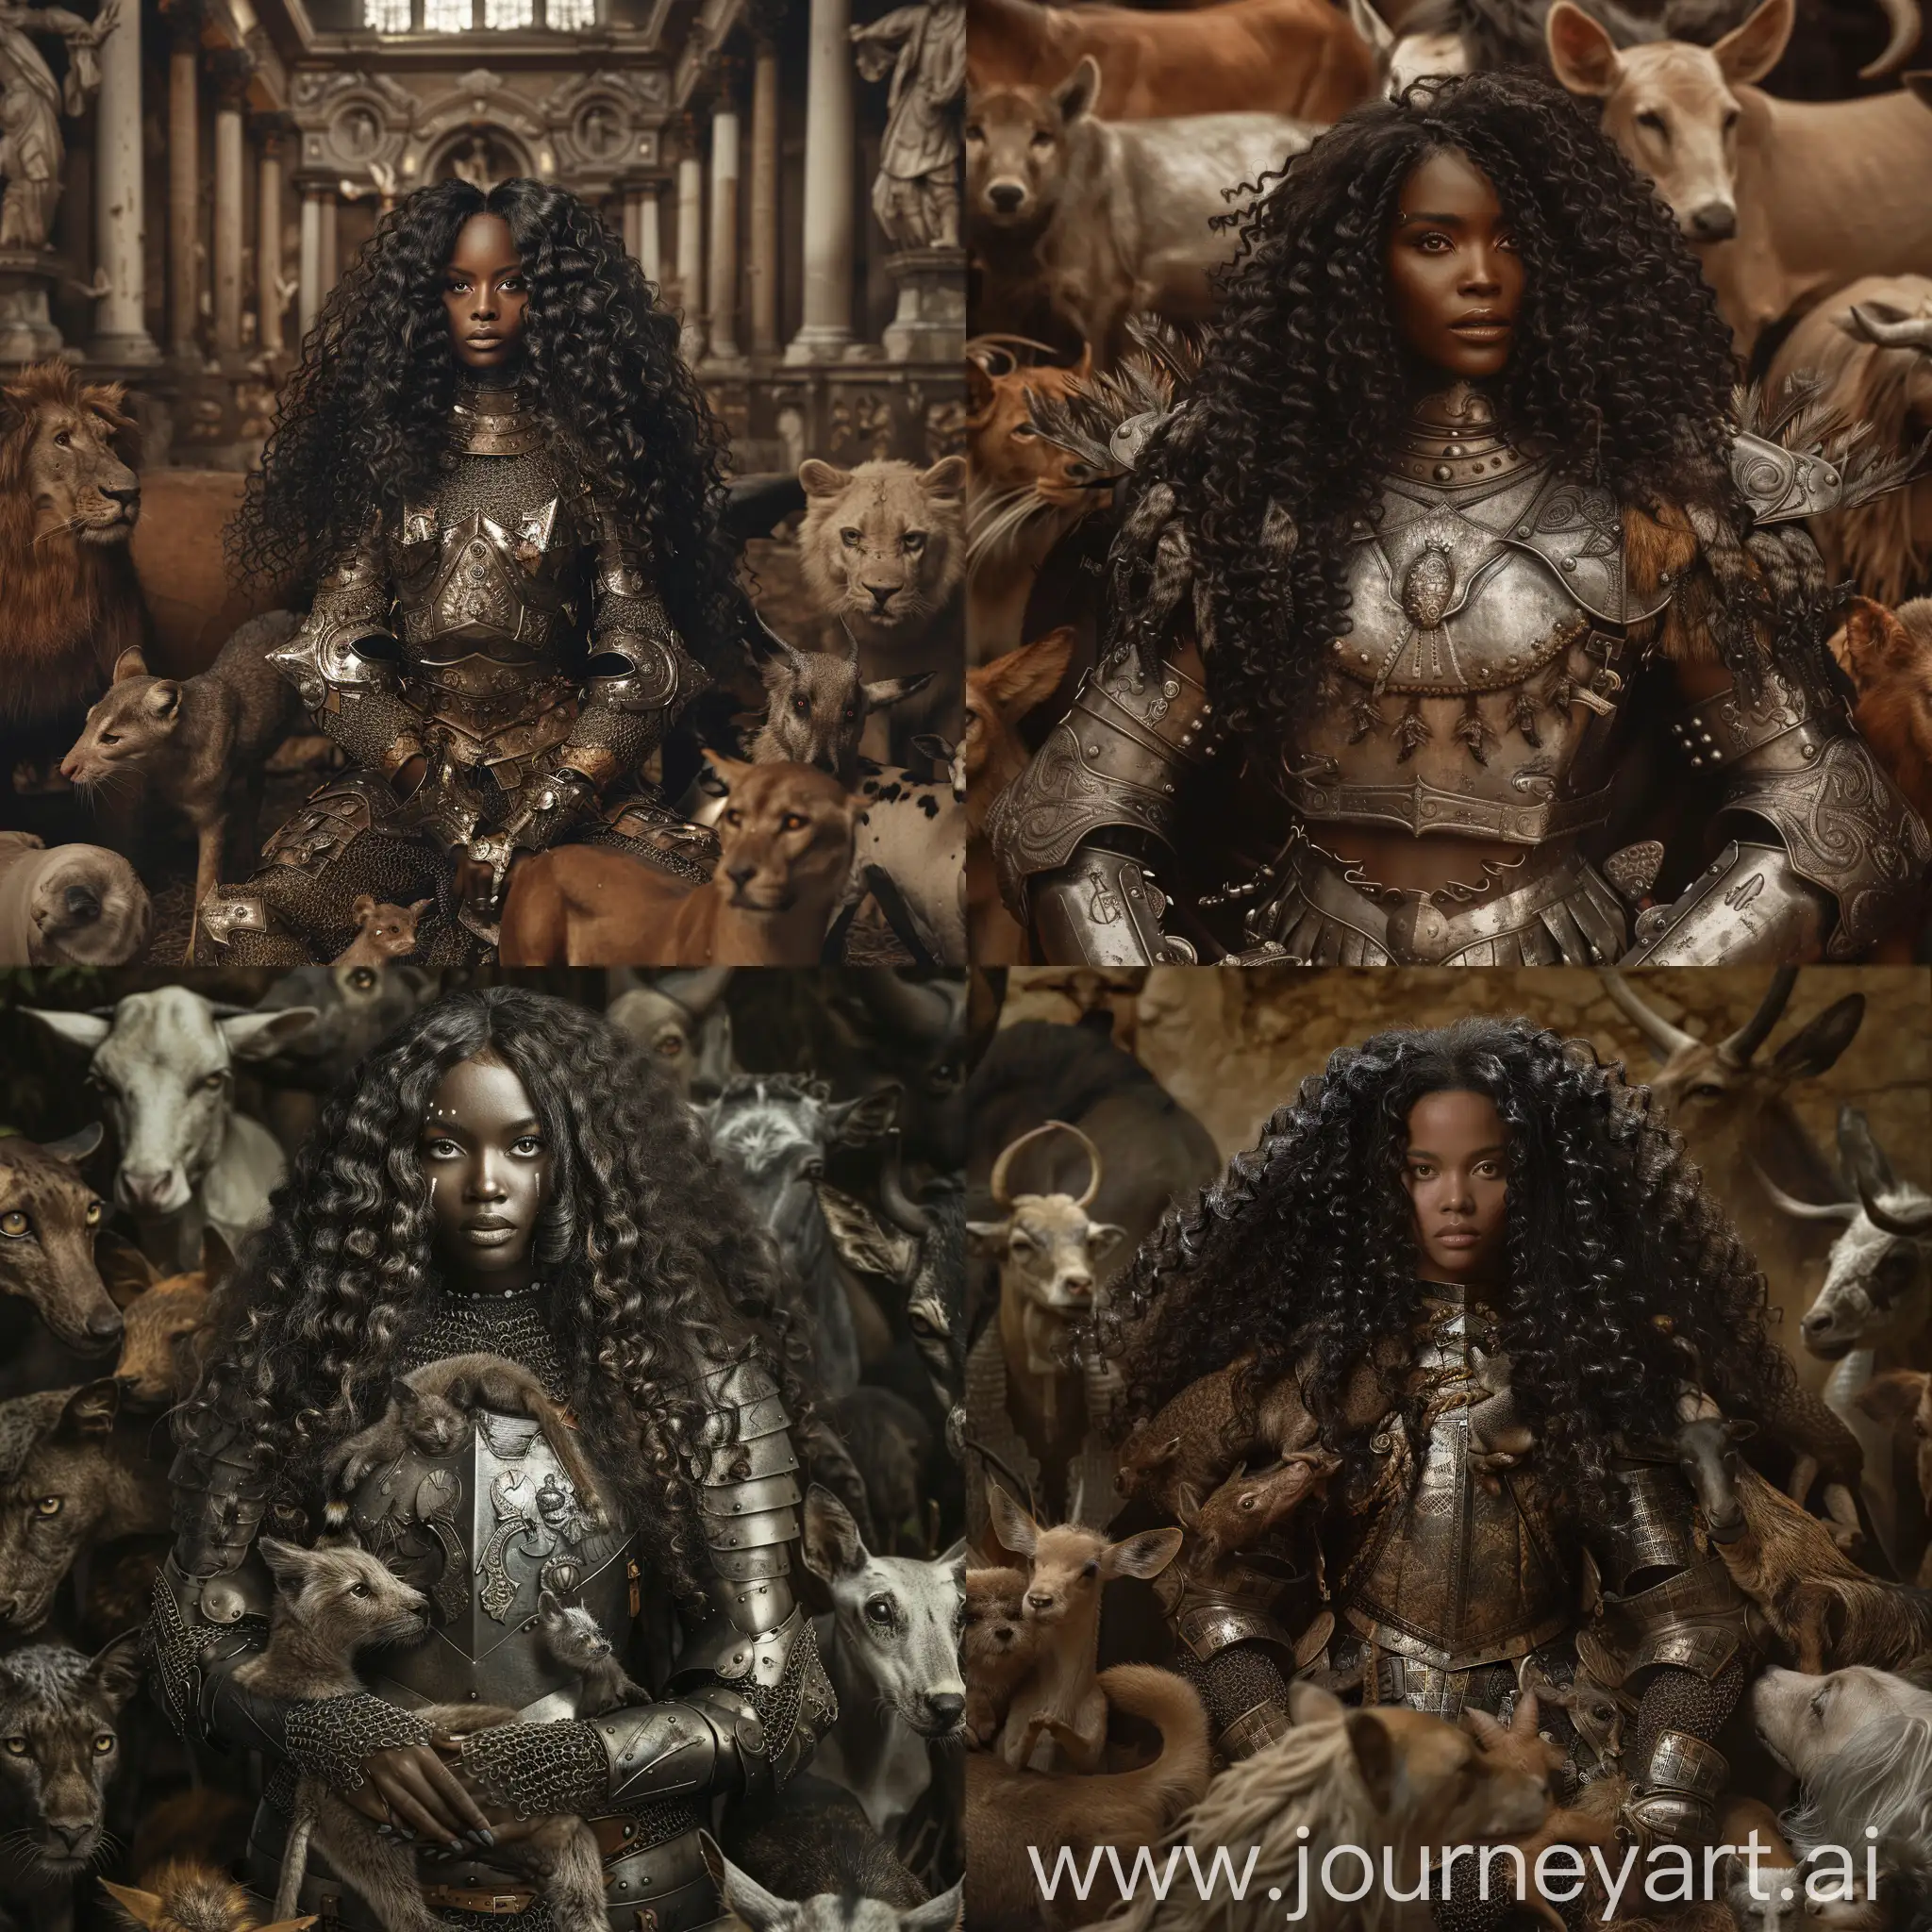 Hyperrealistic photography of a Black woman with long curly hair wearing a full set of intricate armor surroundedby animals --v 6 